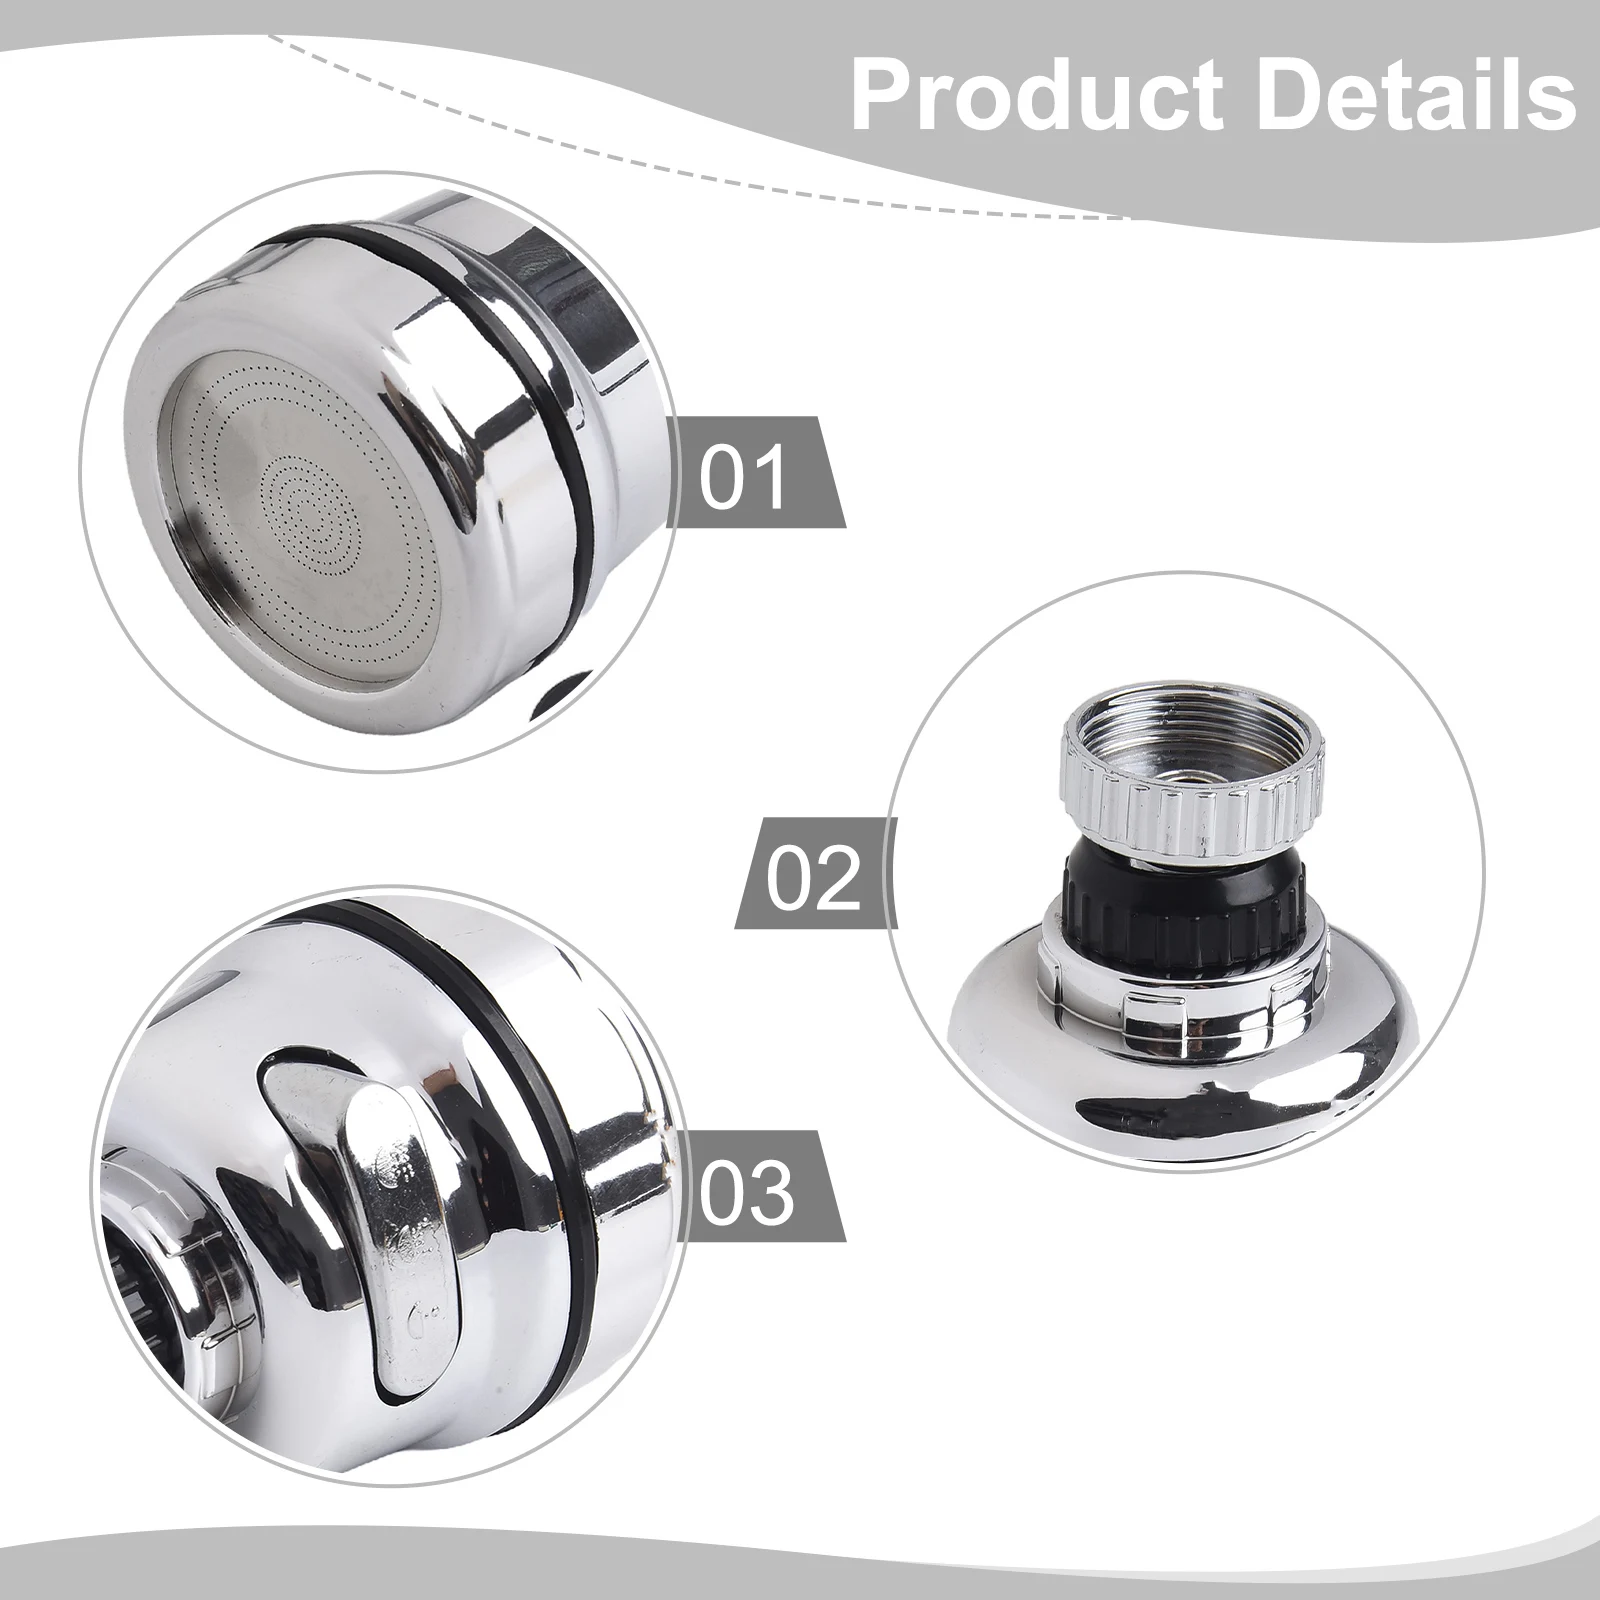 

360 Degree Kitchen Faucet Aerator Adjustable Bathroom Water Filter Diffuser Water Saving Nozzle Faucet Connector Shower Bubbler